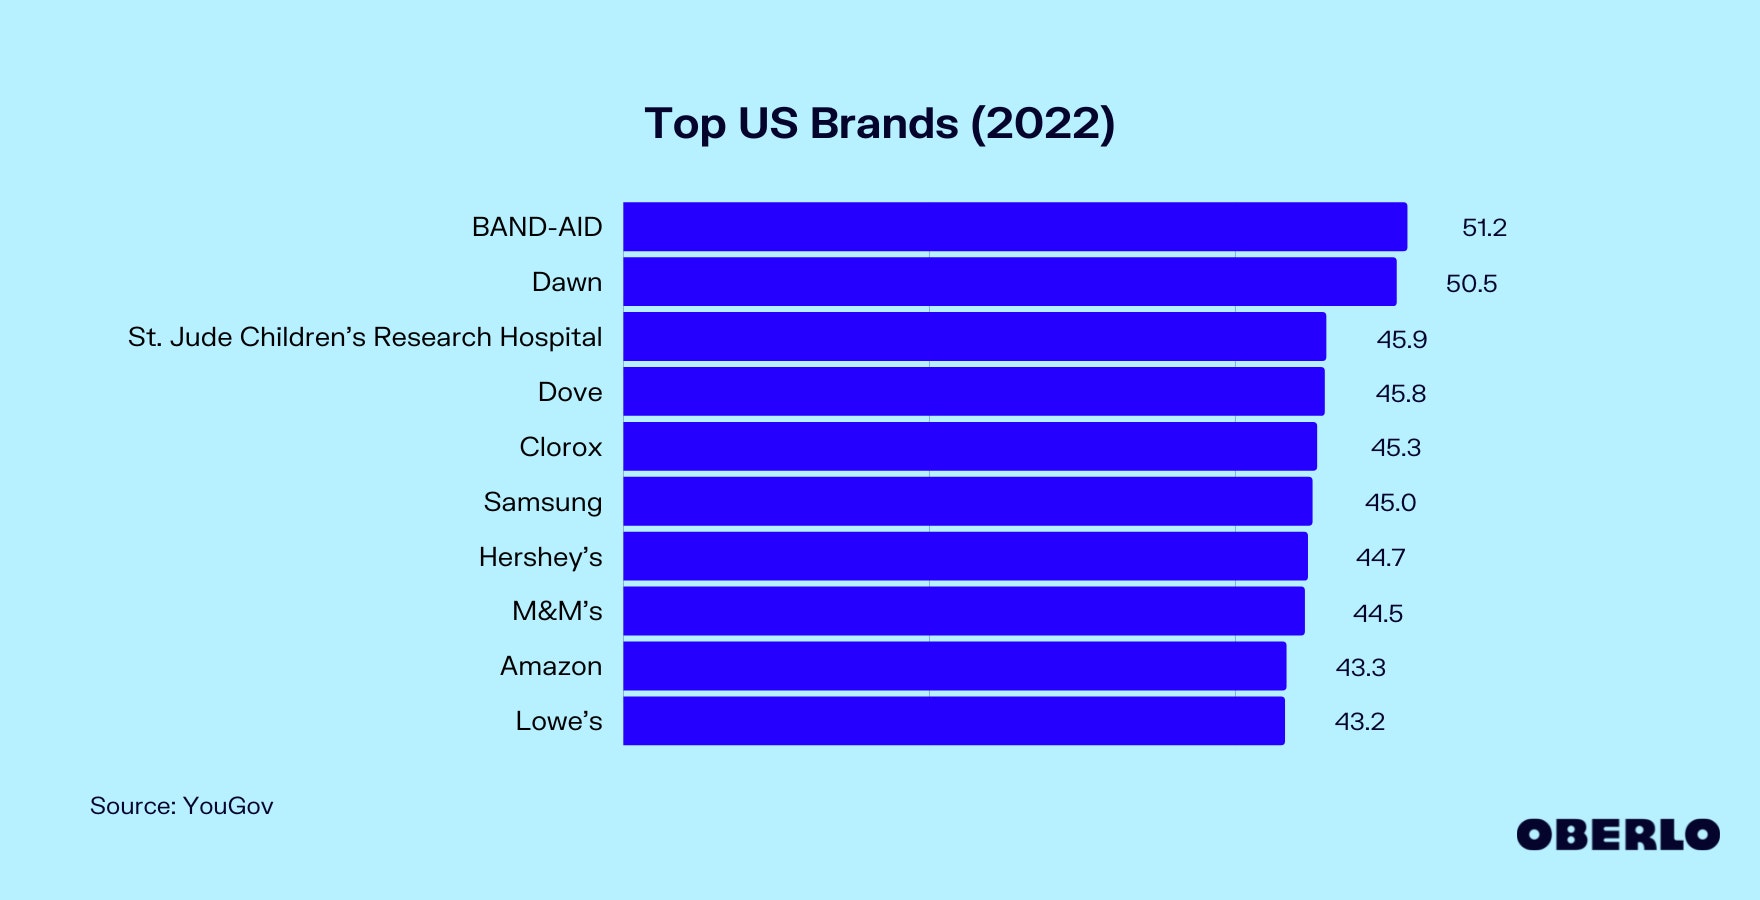 Chart of the Top US Brands in 2022